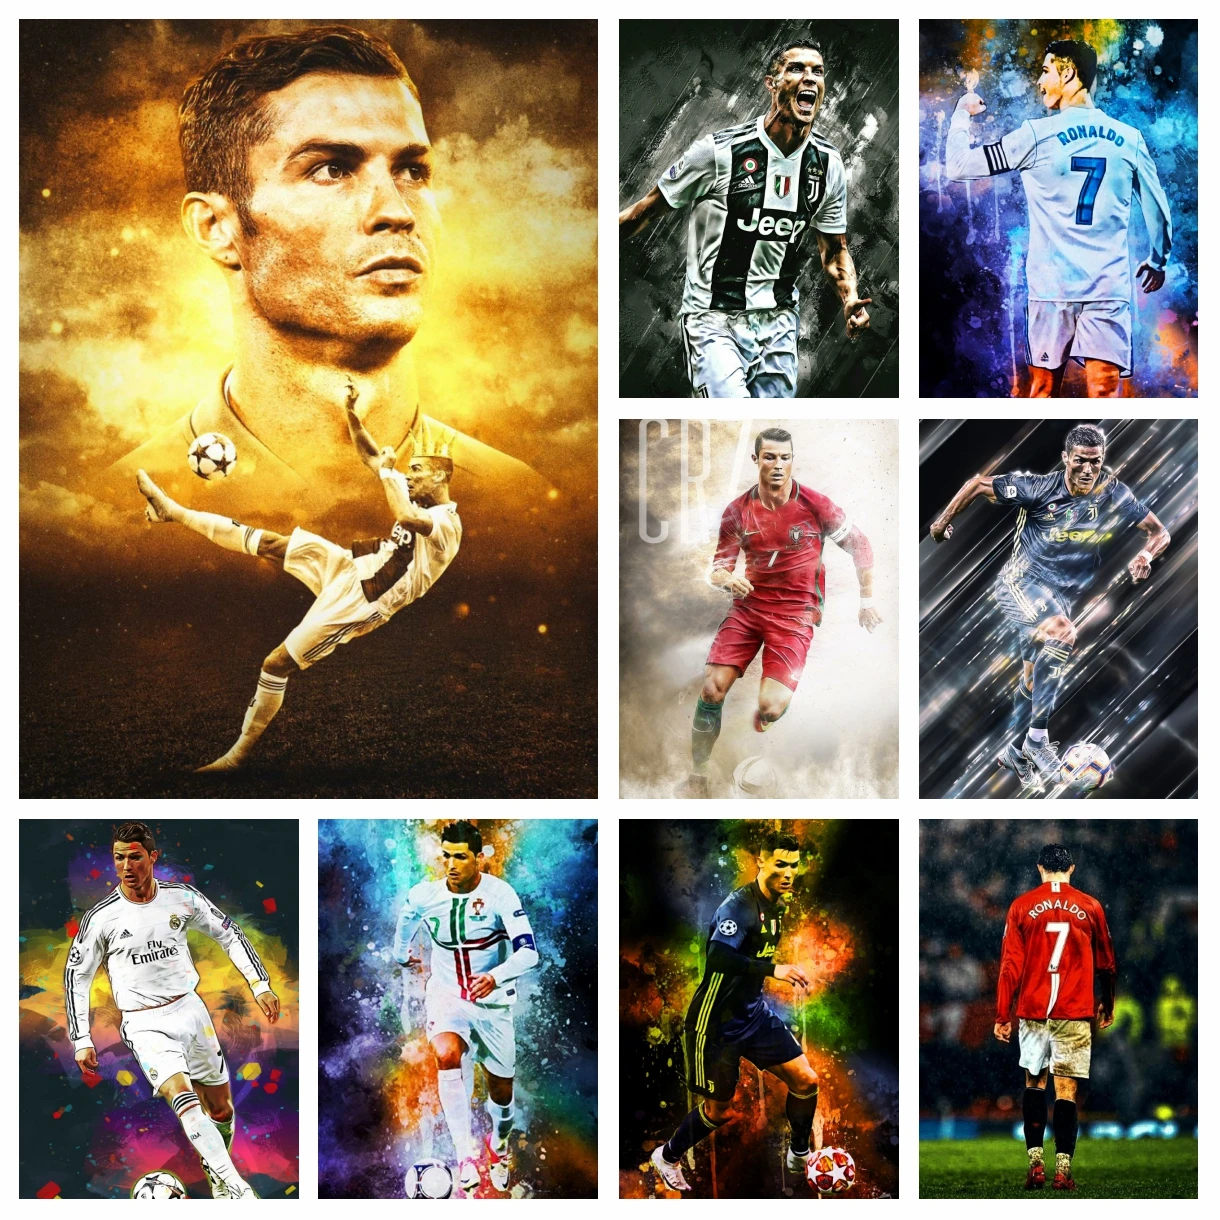 

DIY Cristiano Ronaldo Diamond Painting Football Star CR7 Poster Wall Art Cross Stitch Embroidery Picture Mosaic Craft Home Decor